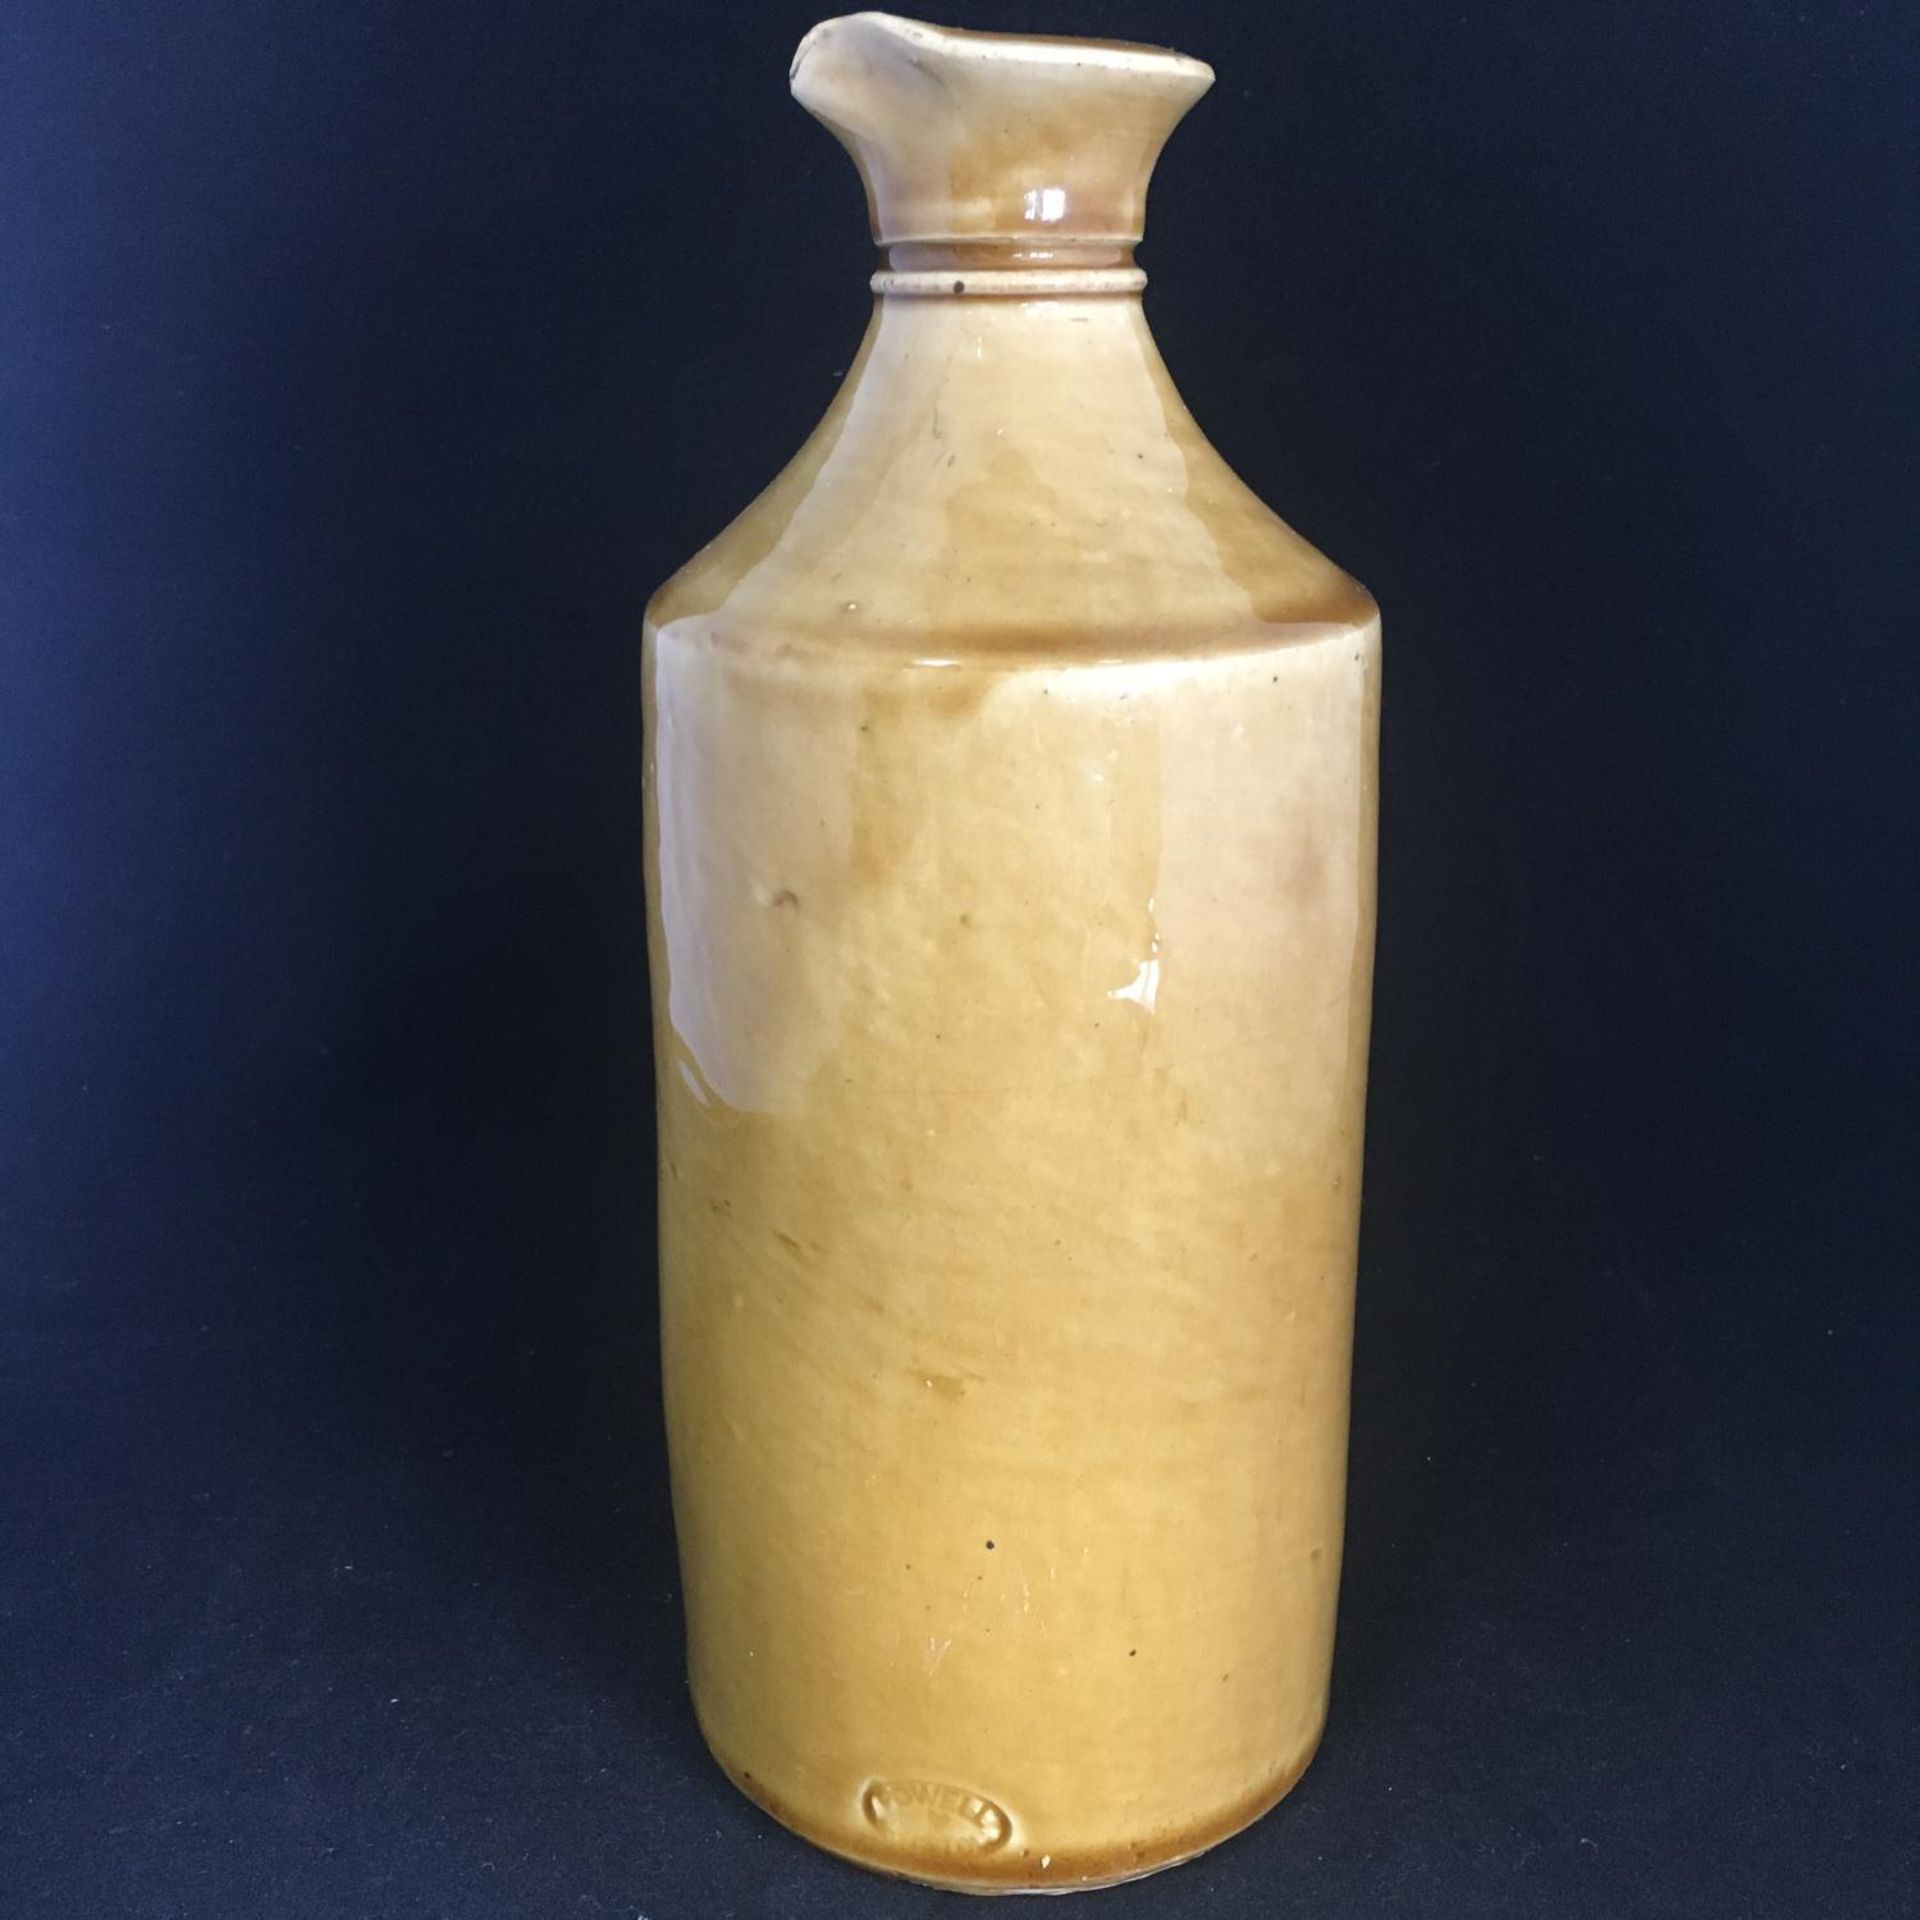 ANTIQUE c.1890 POWELL BRISTOL STONEWARE BULK INK POURER. Used for filling school inkwells. The